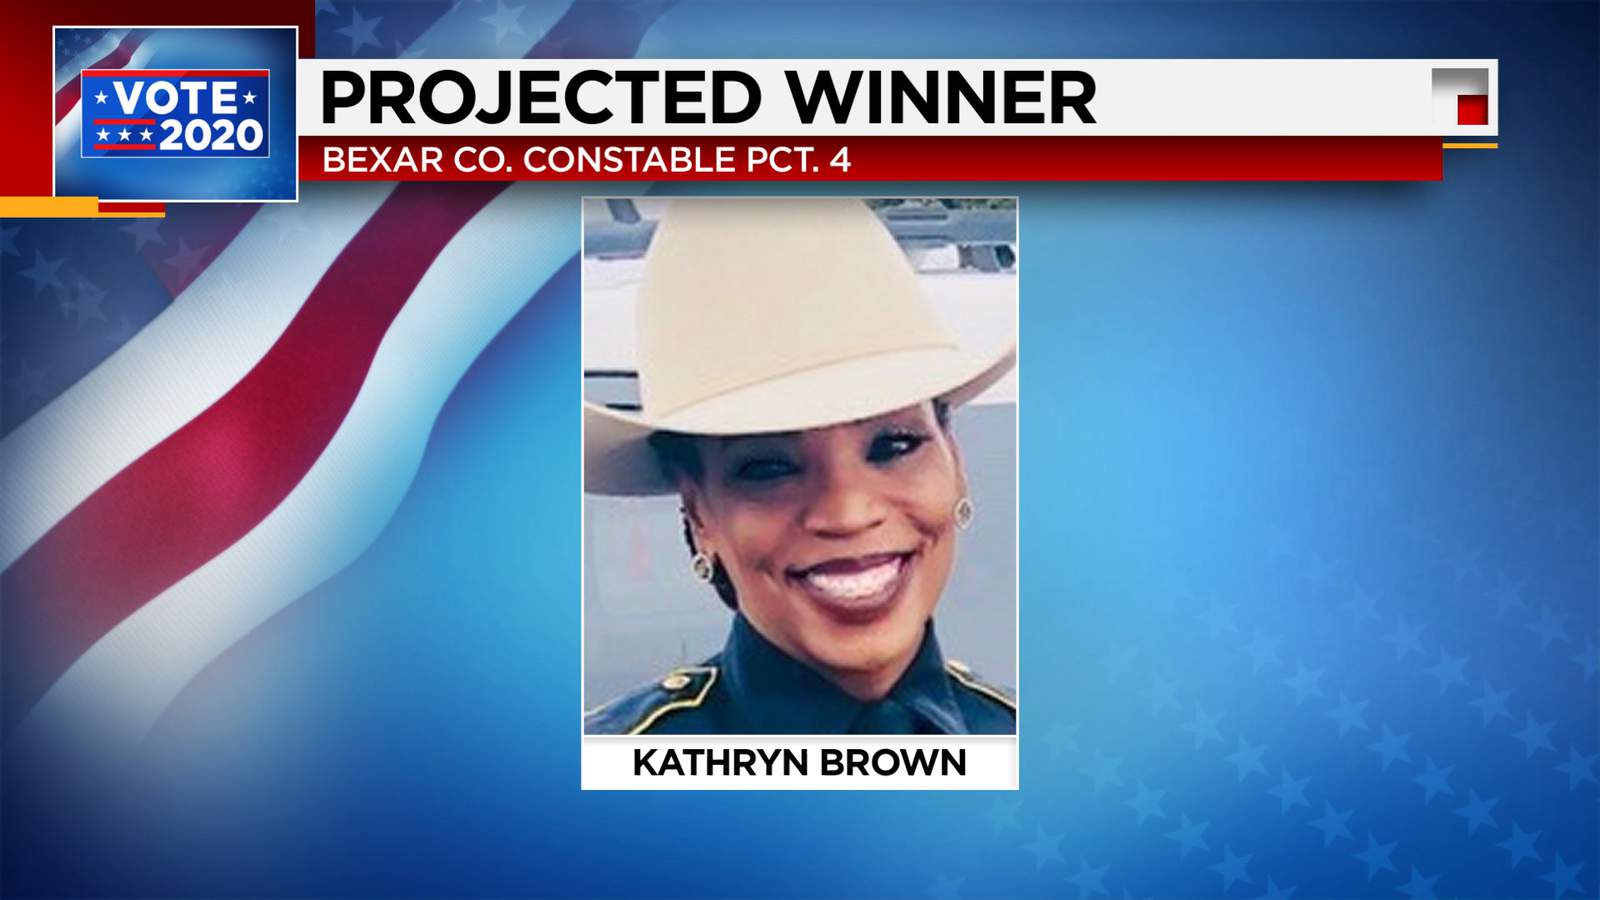 Kathryn Brown becomes first Black woman elected as Bexar County Constable